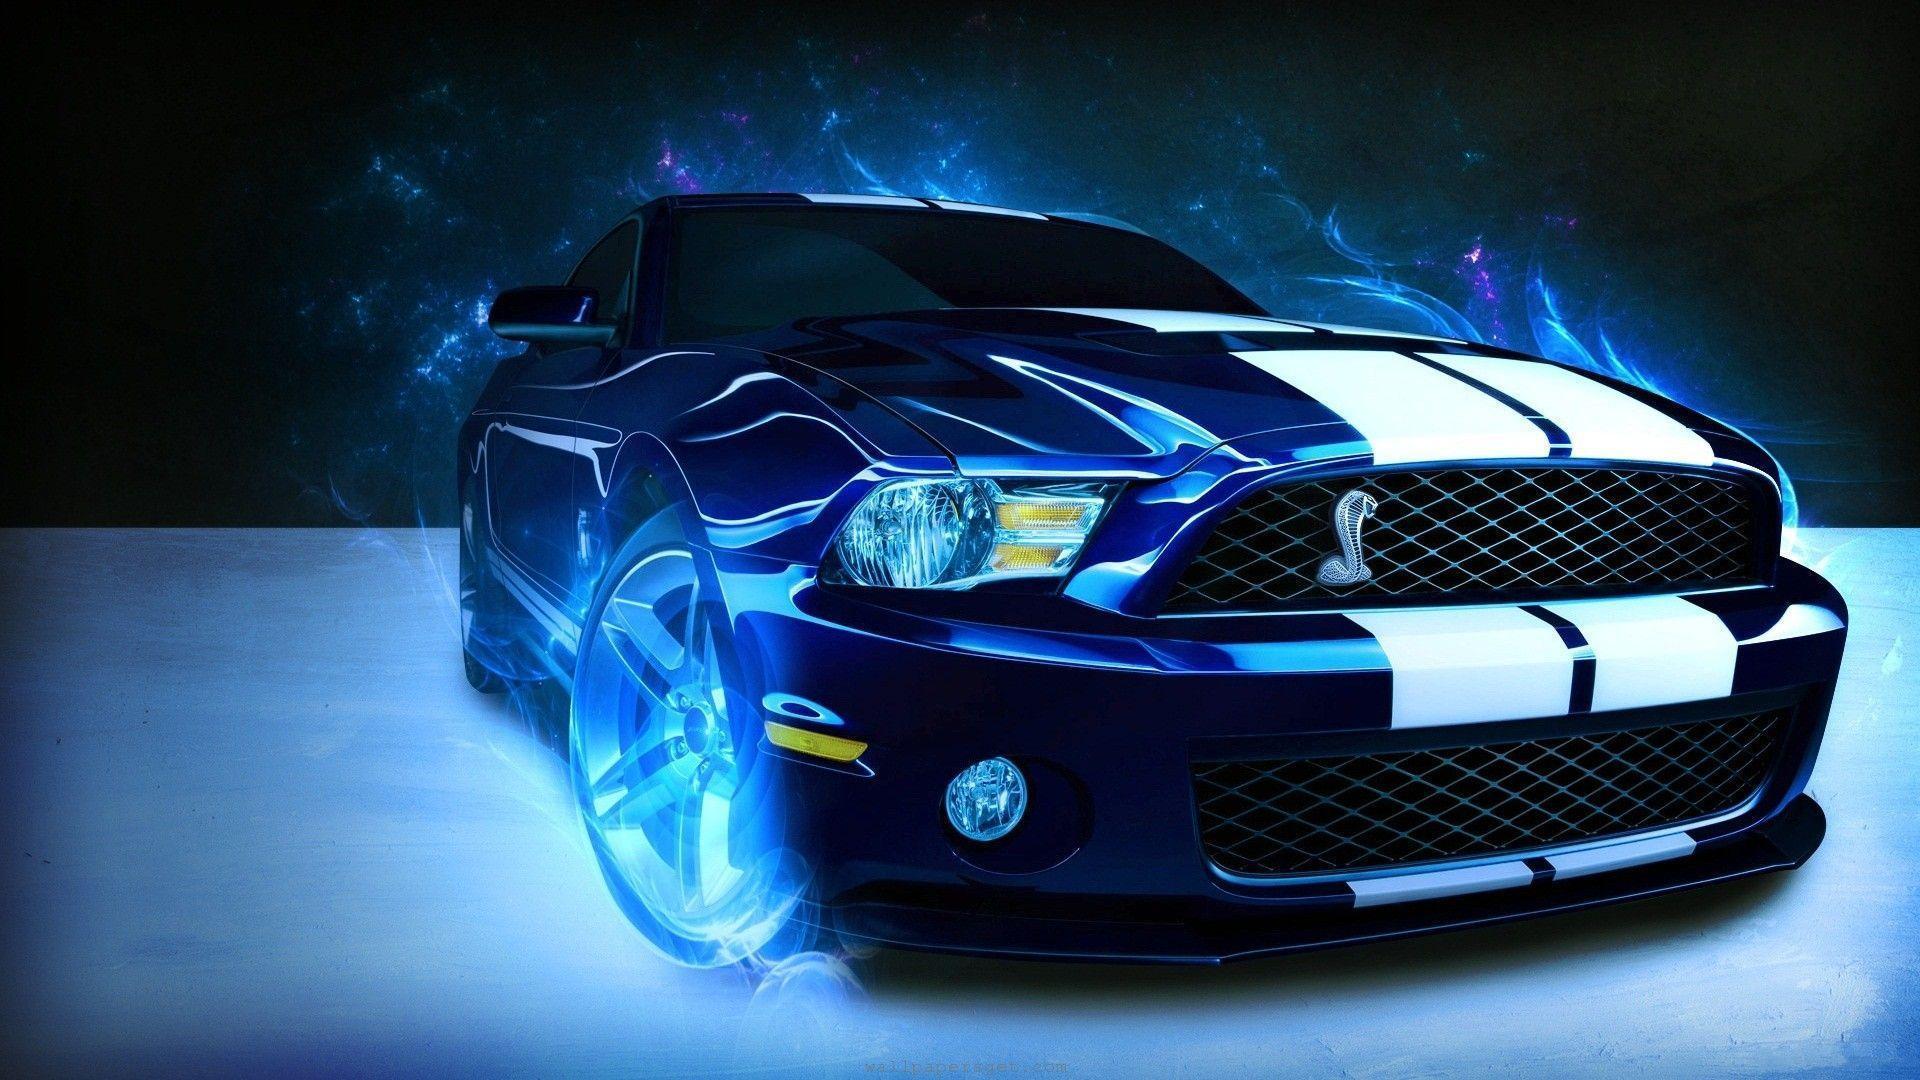 Ford Mustang Gt Background HD Wallpaper. RED AUTO CAR ADDICT